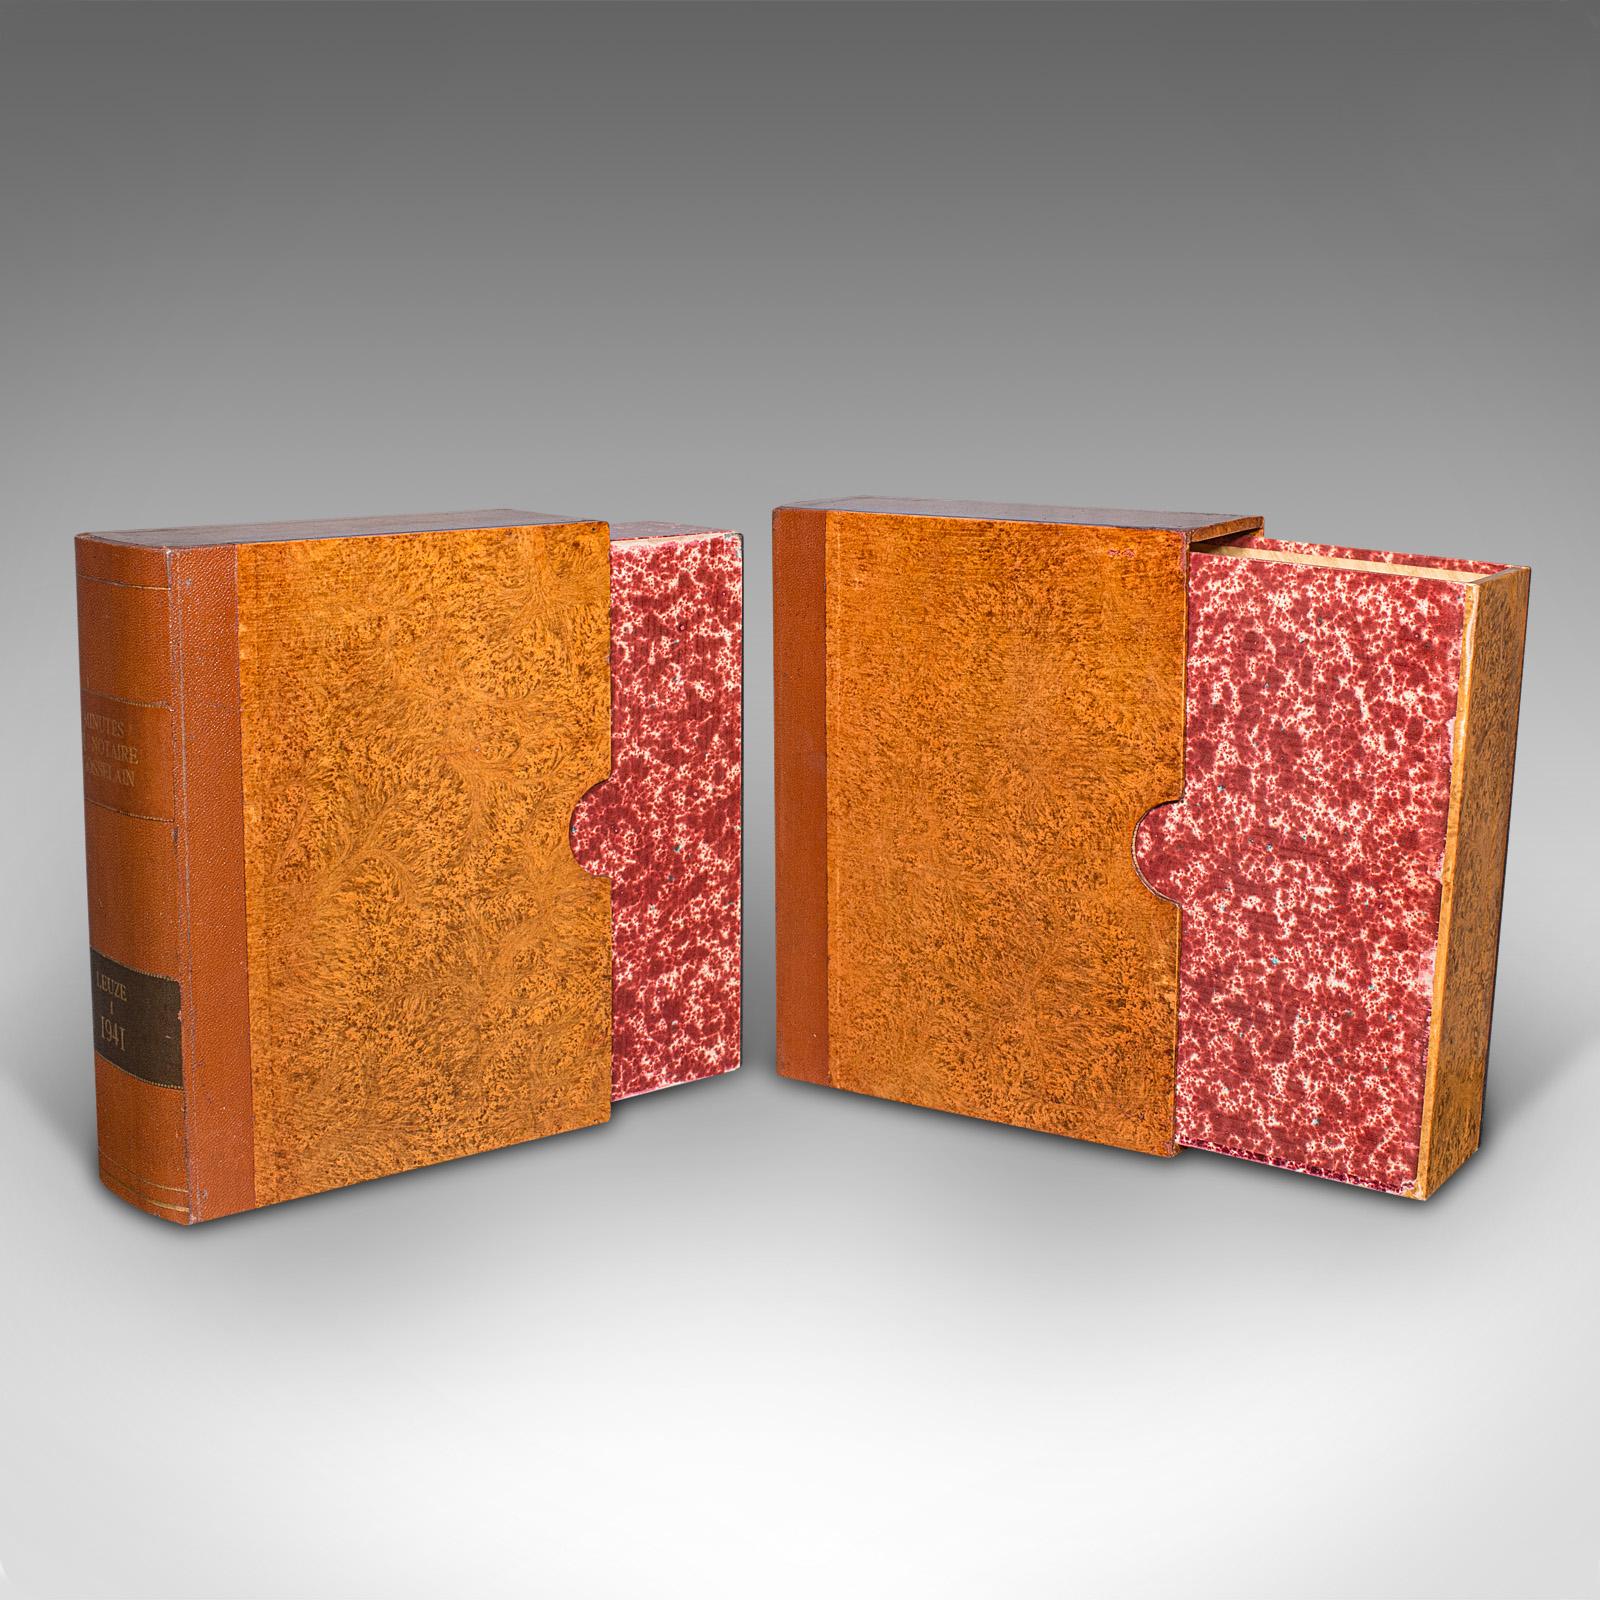 This is a pair of vintage book boxes. An English, leather-bound secret safe or folio storage, dating to the mid 20th century, circa 1950.

Keep unwanted attention away with this pair of concealed storage boxes
Displays a desirable aged patina and